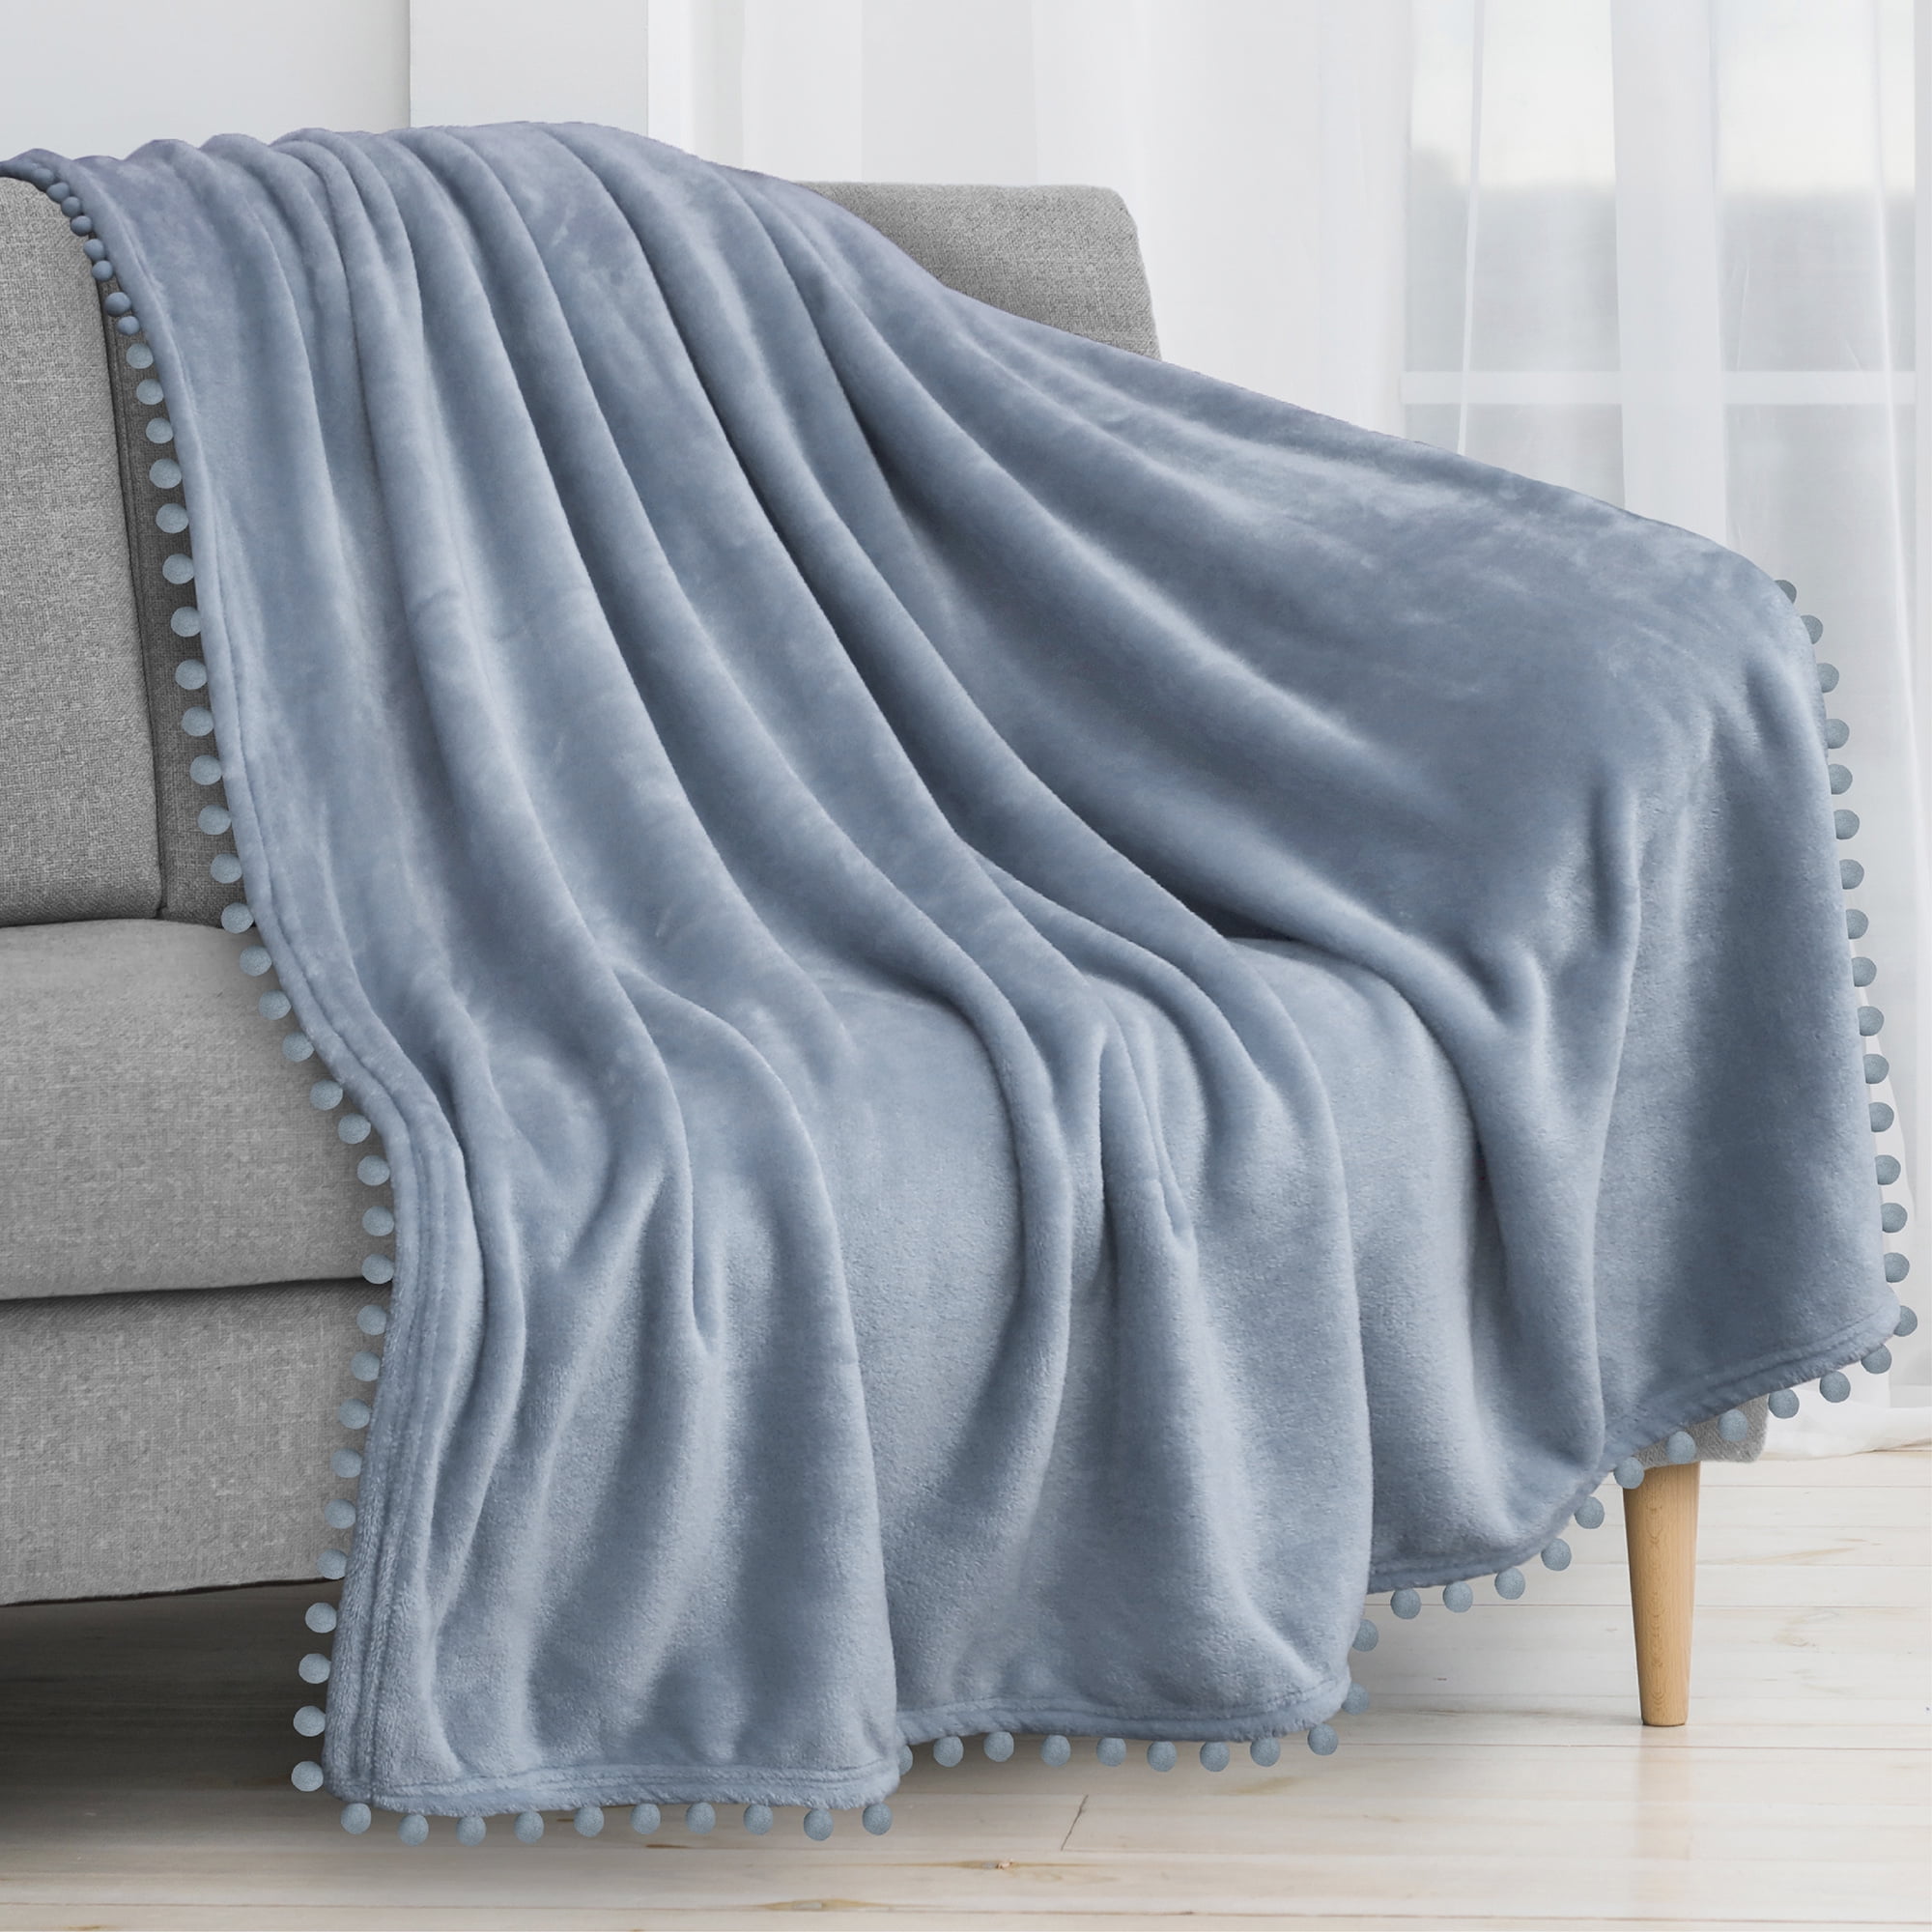 Alician Soft Solid Color Warm Throw Blanket for Sofa Home Supplies Blue 5070cm